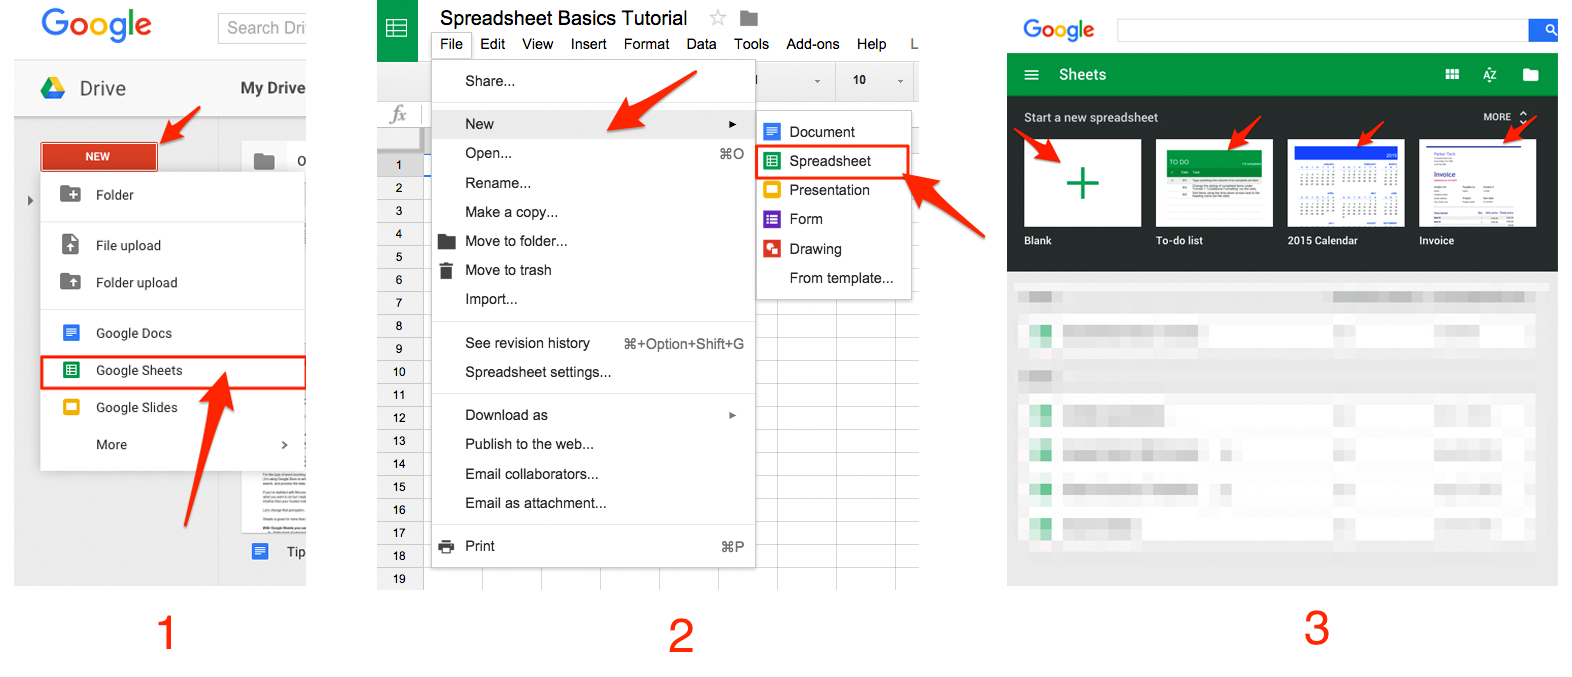 Free Spreadsheet Download For Windows 10 Regarding Google Sheets 101: The Beginner's Guide To Online Spreadsheets The